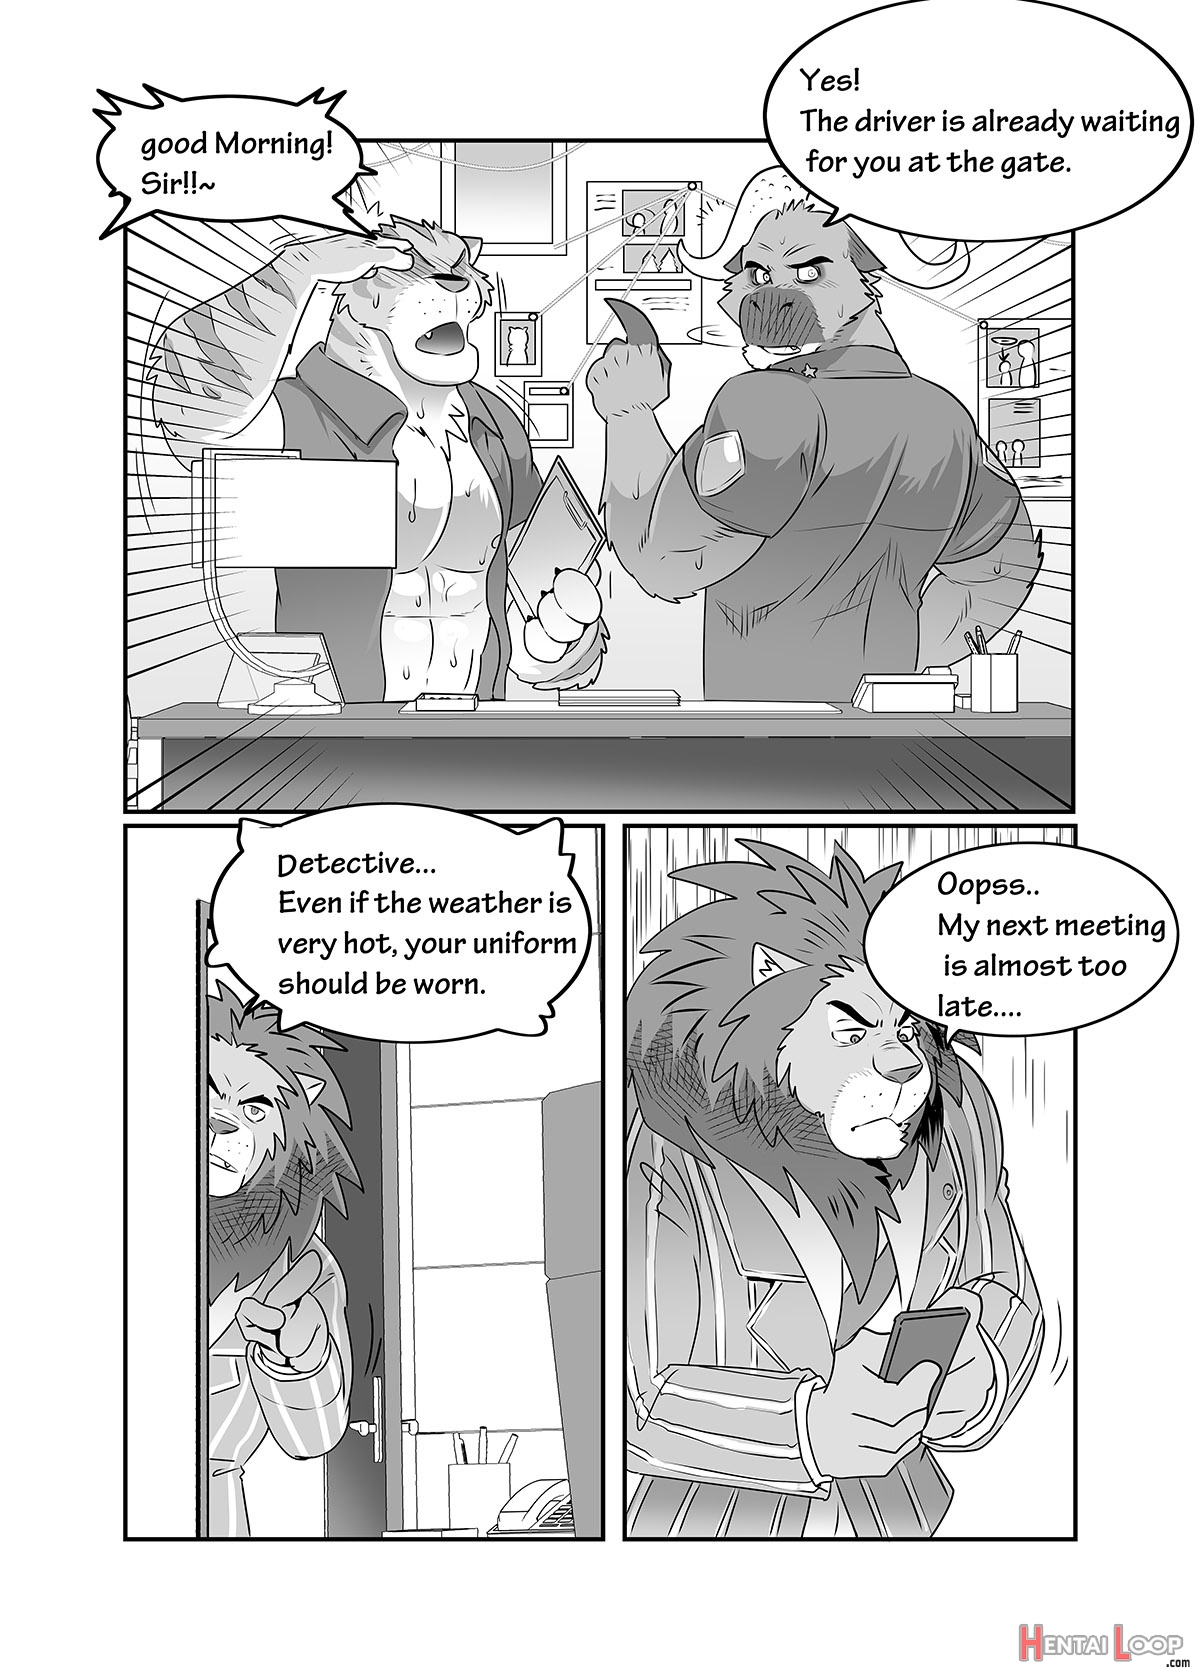 Chief Bogo Found A Dirty Police page 17